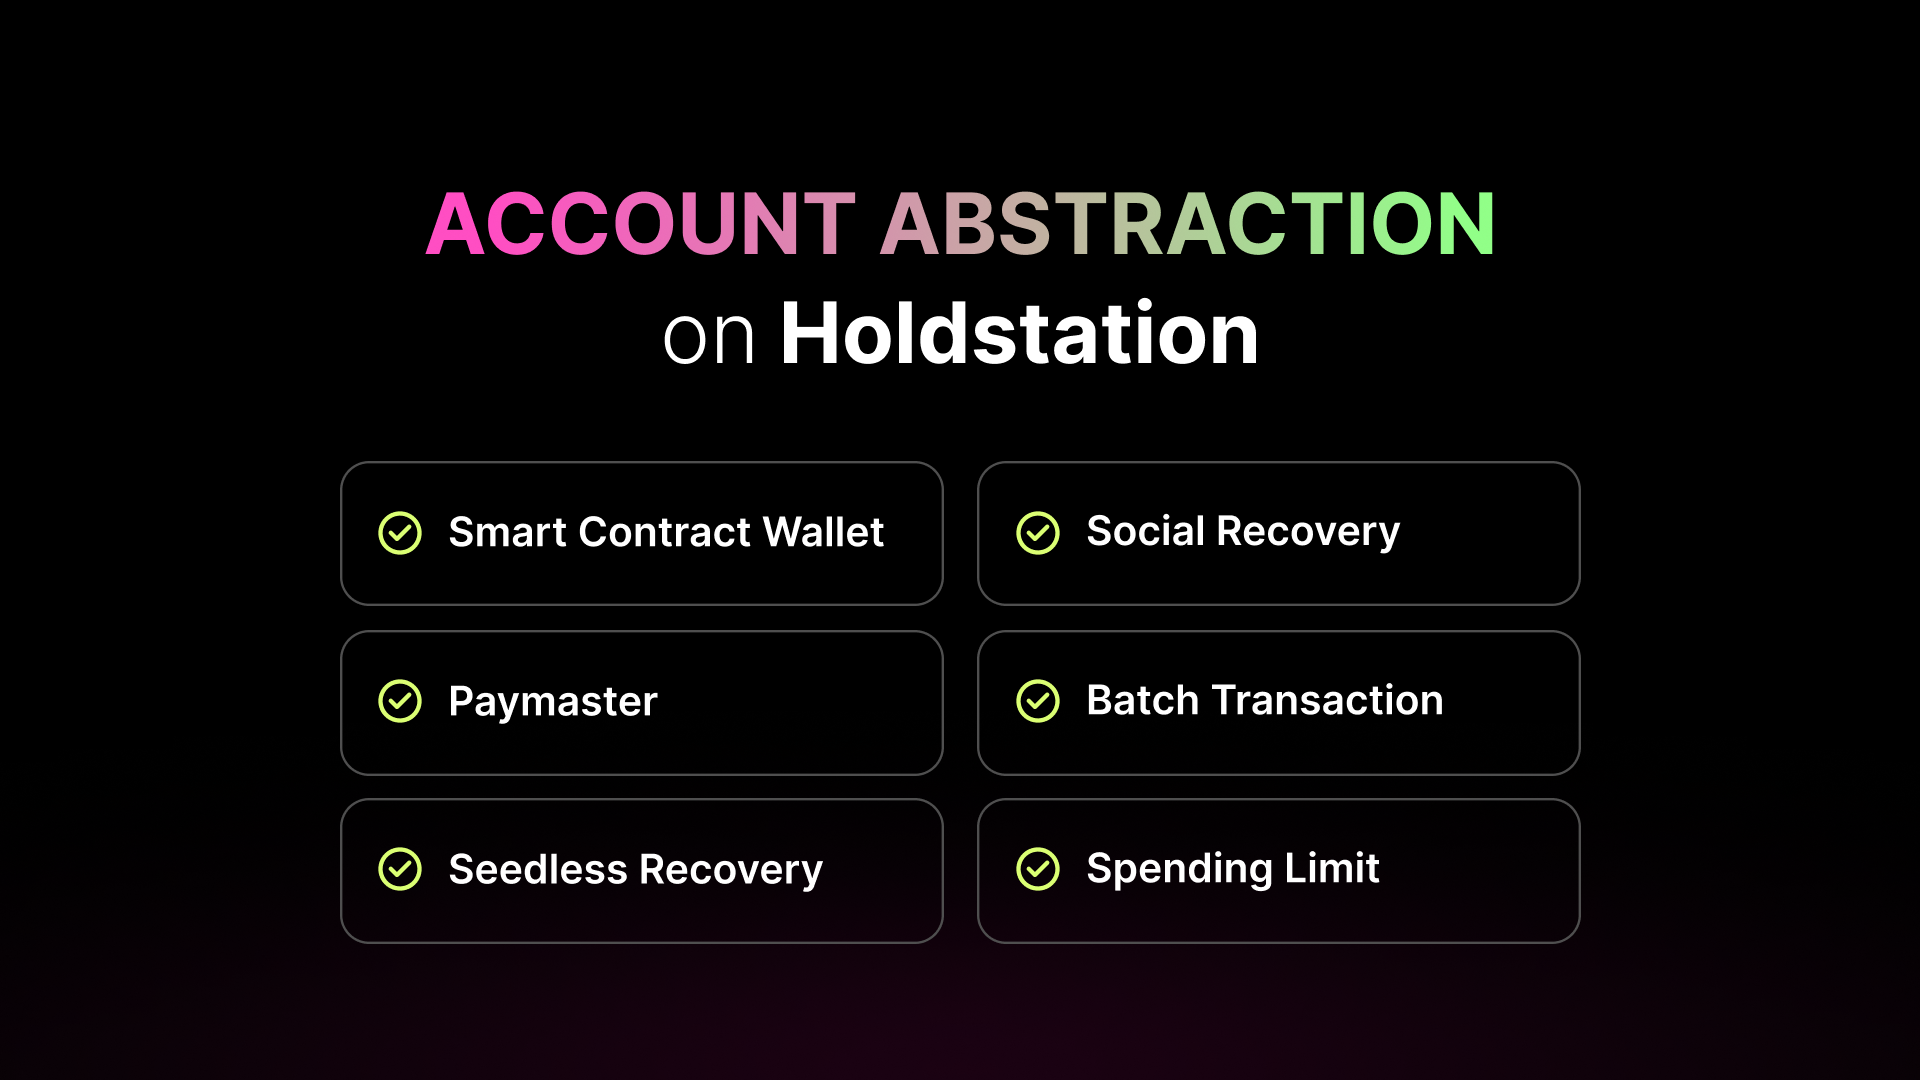 What is $GOLD and $uGOLD? The Utility Token of Holdstation